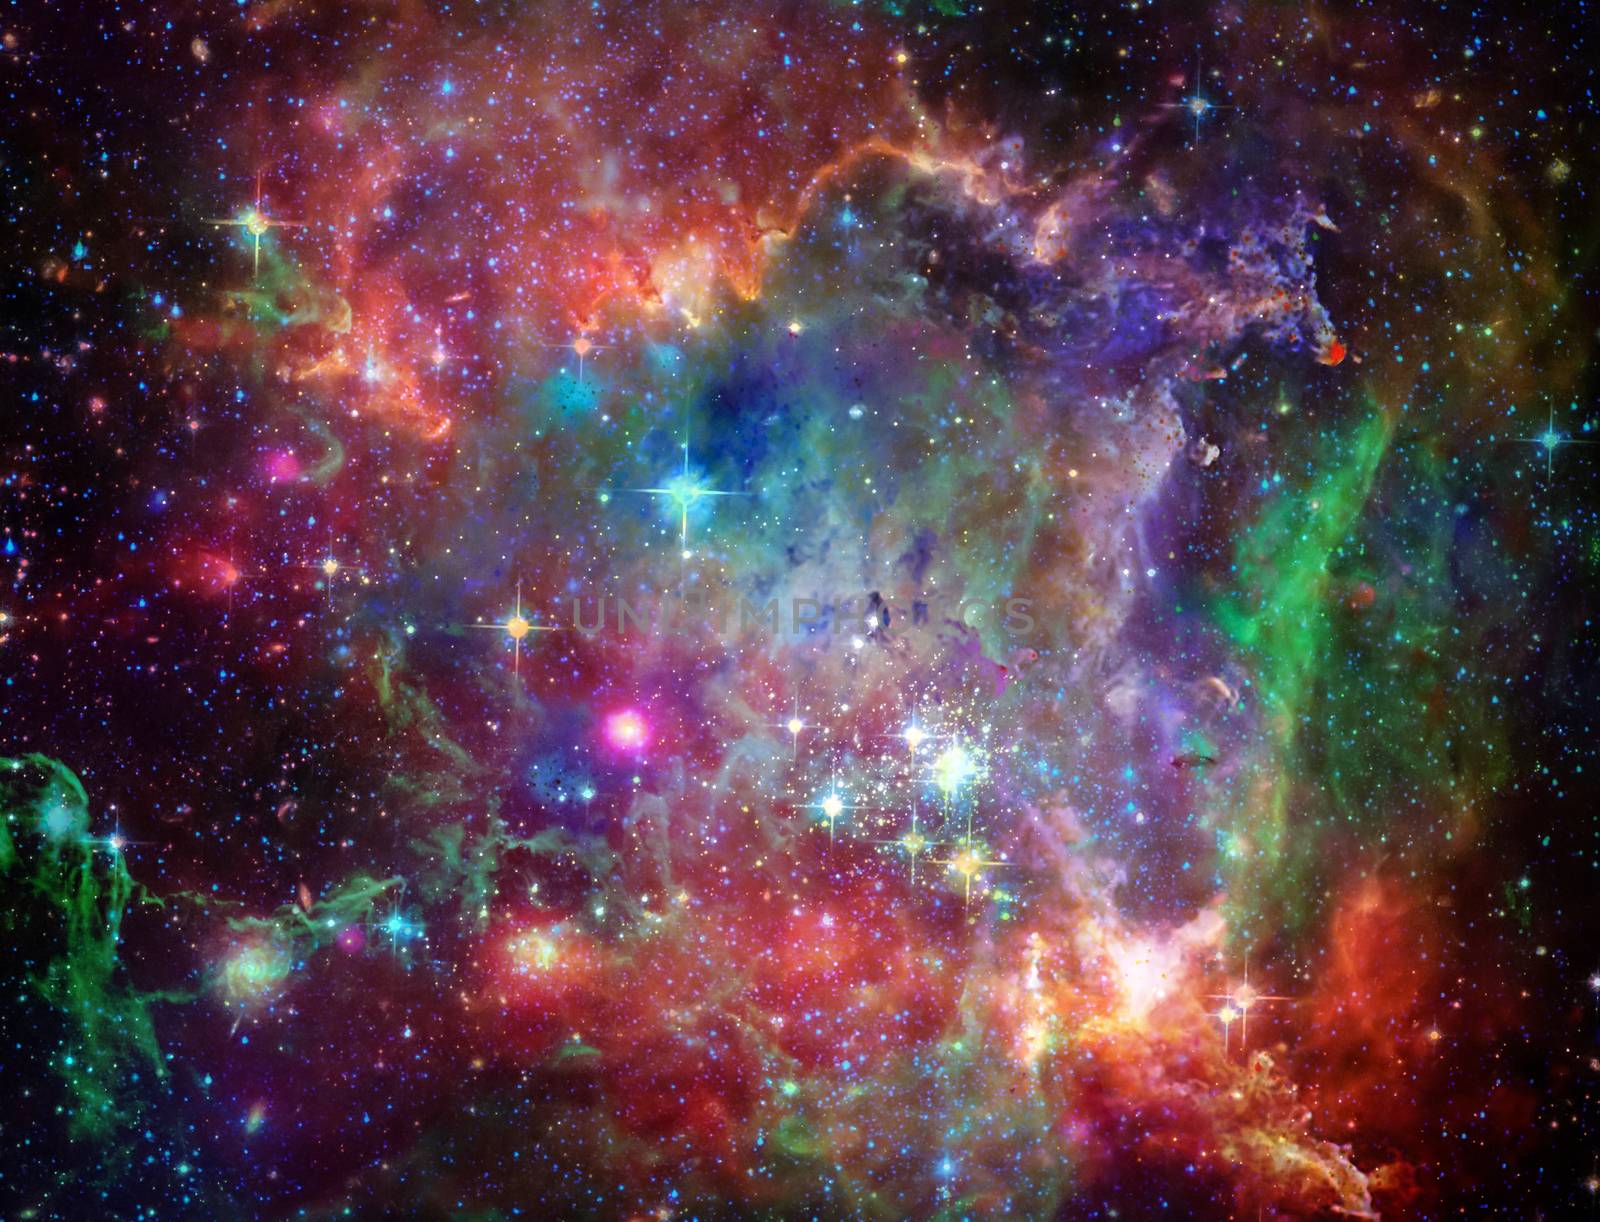 Big Babies in the Rosette Nebula by applesstock